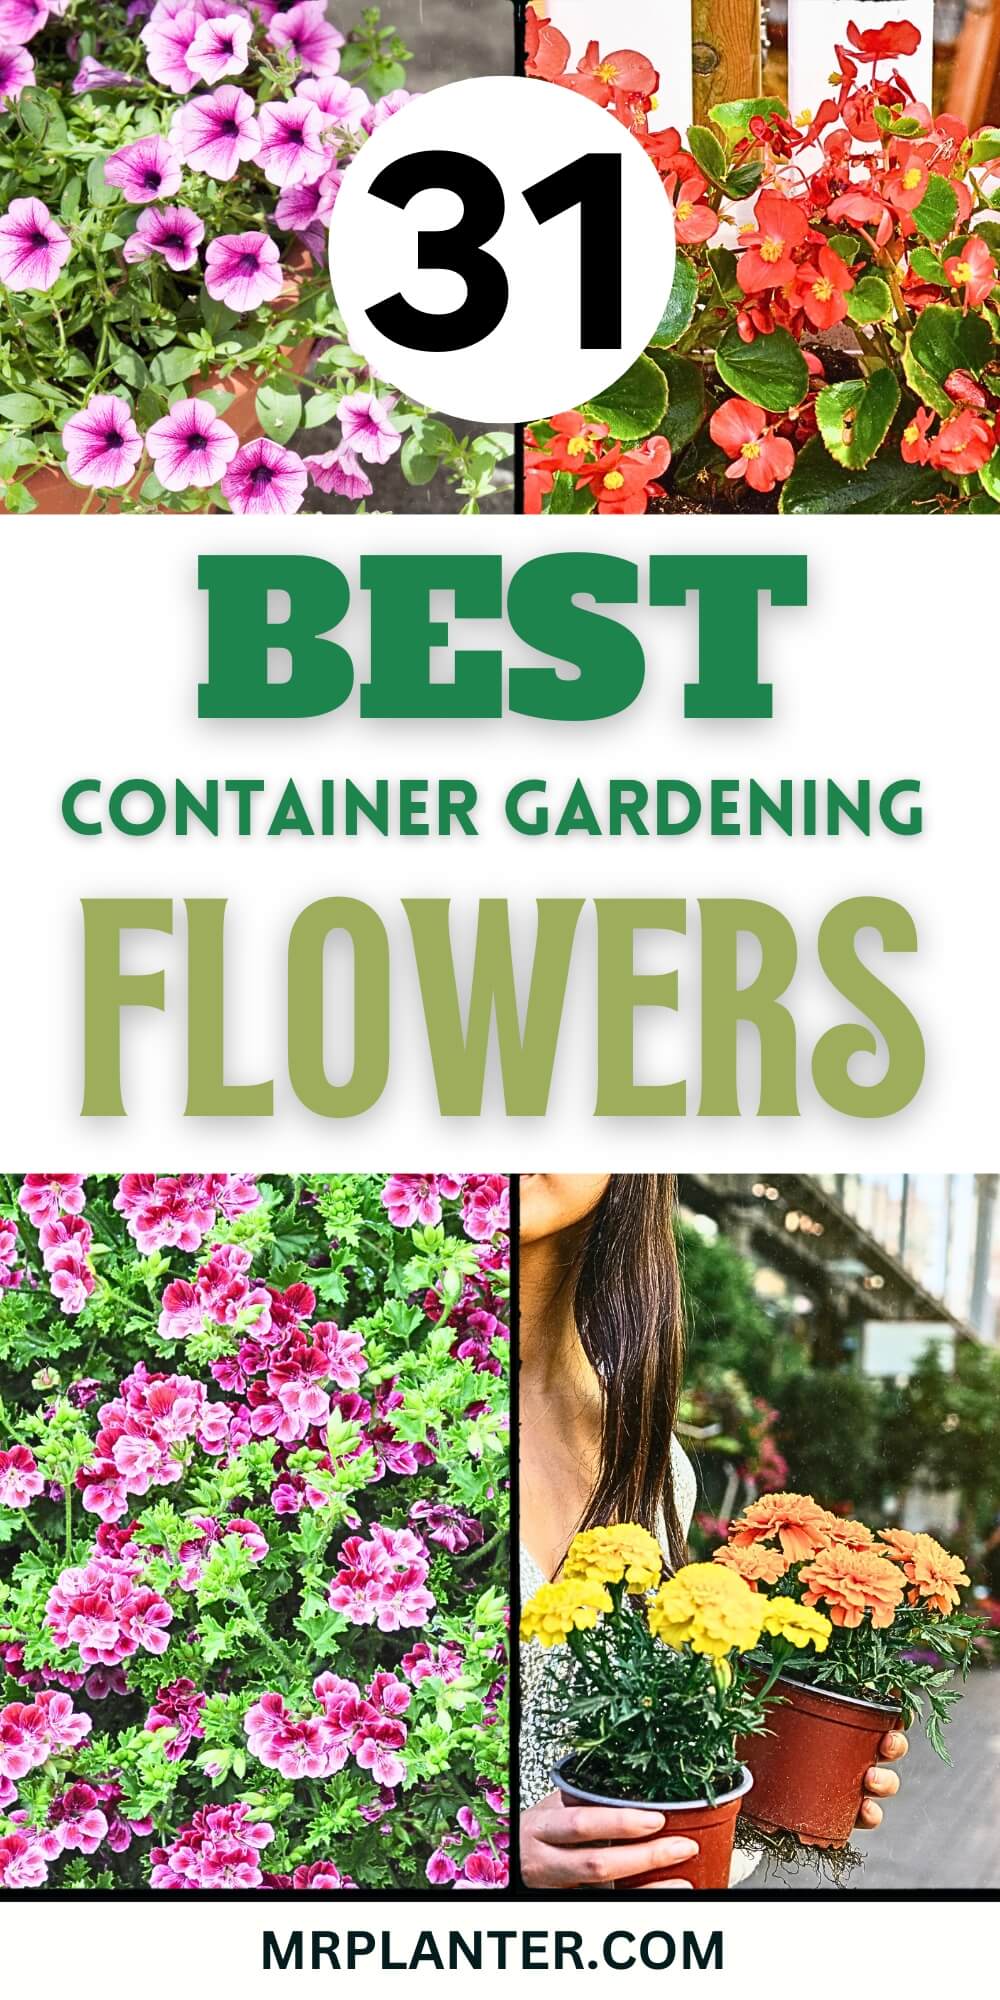 31 Top Container Gardening Flowers for your Patio or Balcony